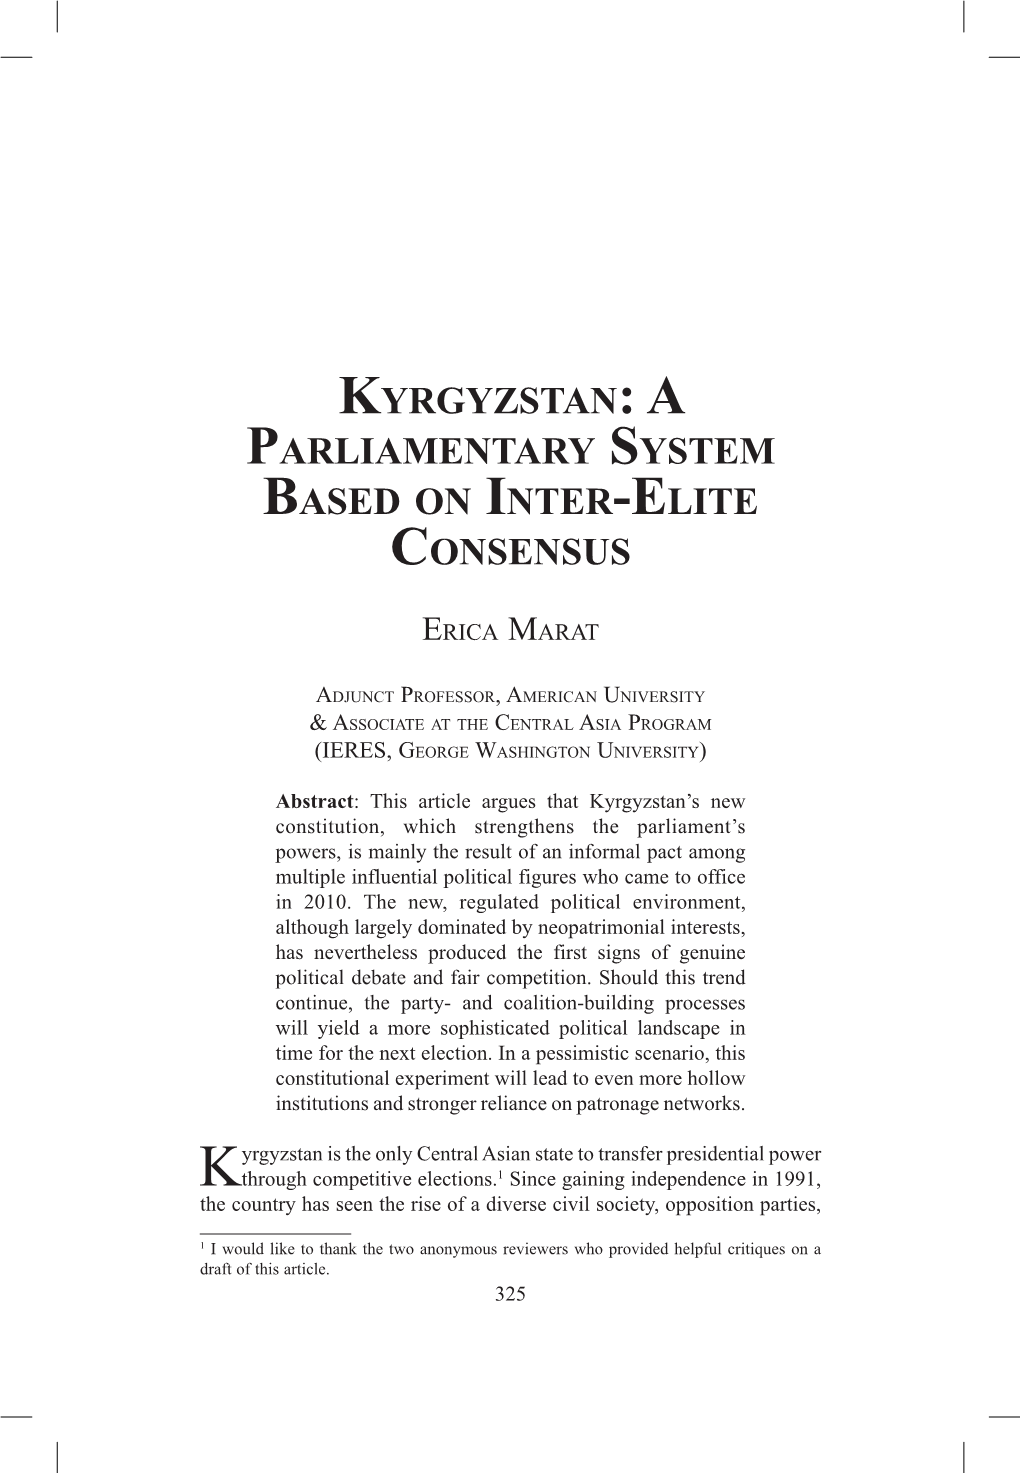 Kyrgyzstan: a Parliamentary System Based on Inter-Elite Consensus